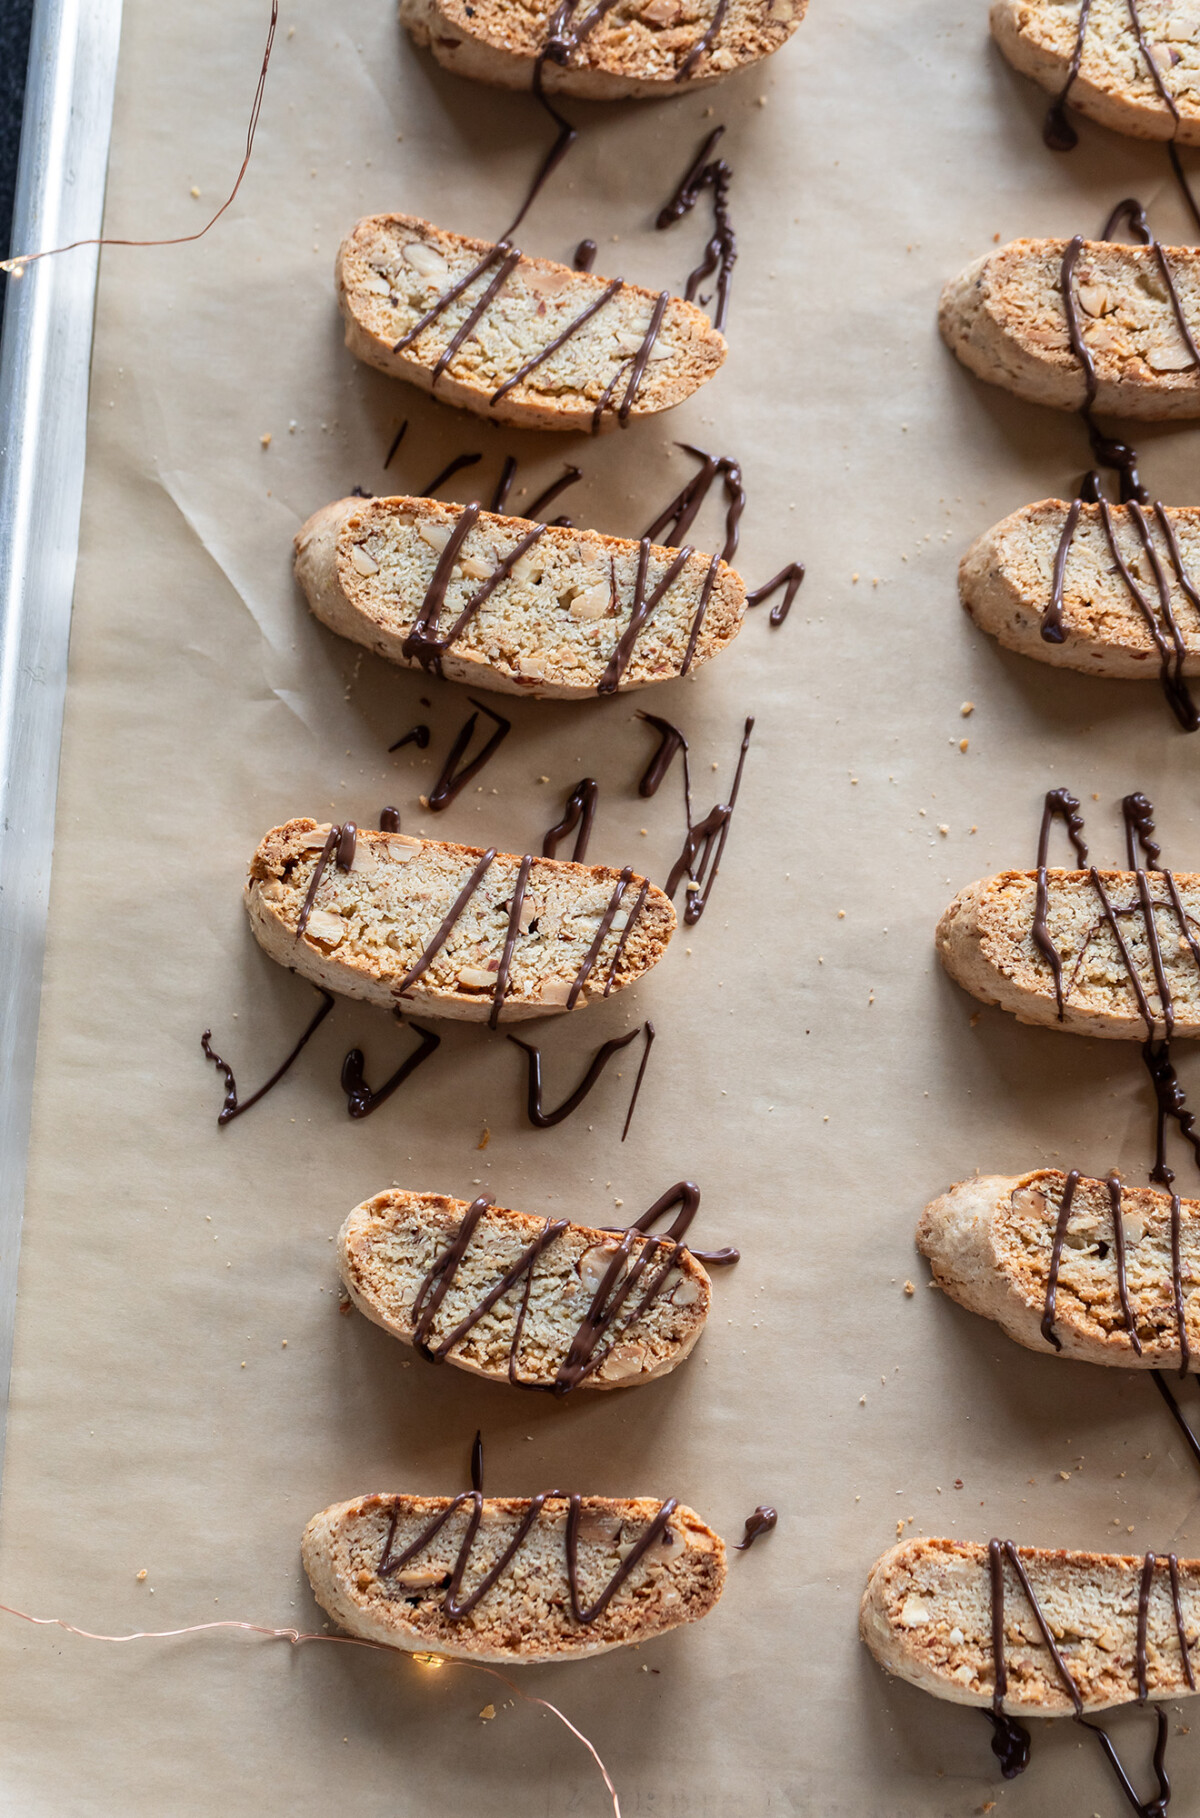 biscotti drizzled with chocolate arranged on a baking sheet